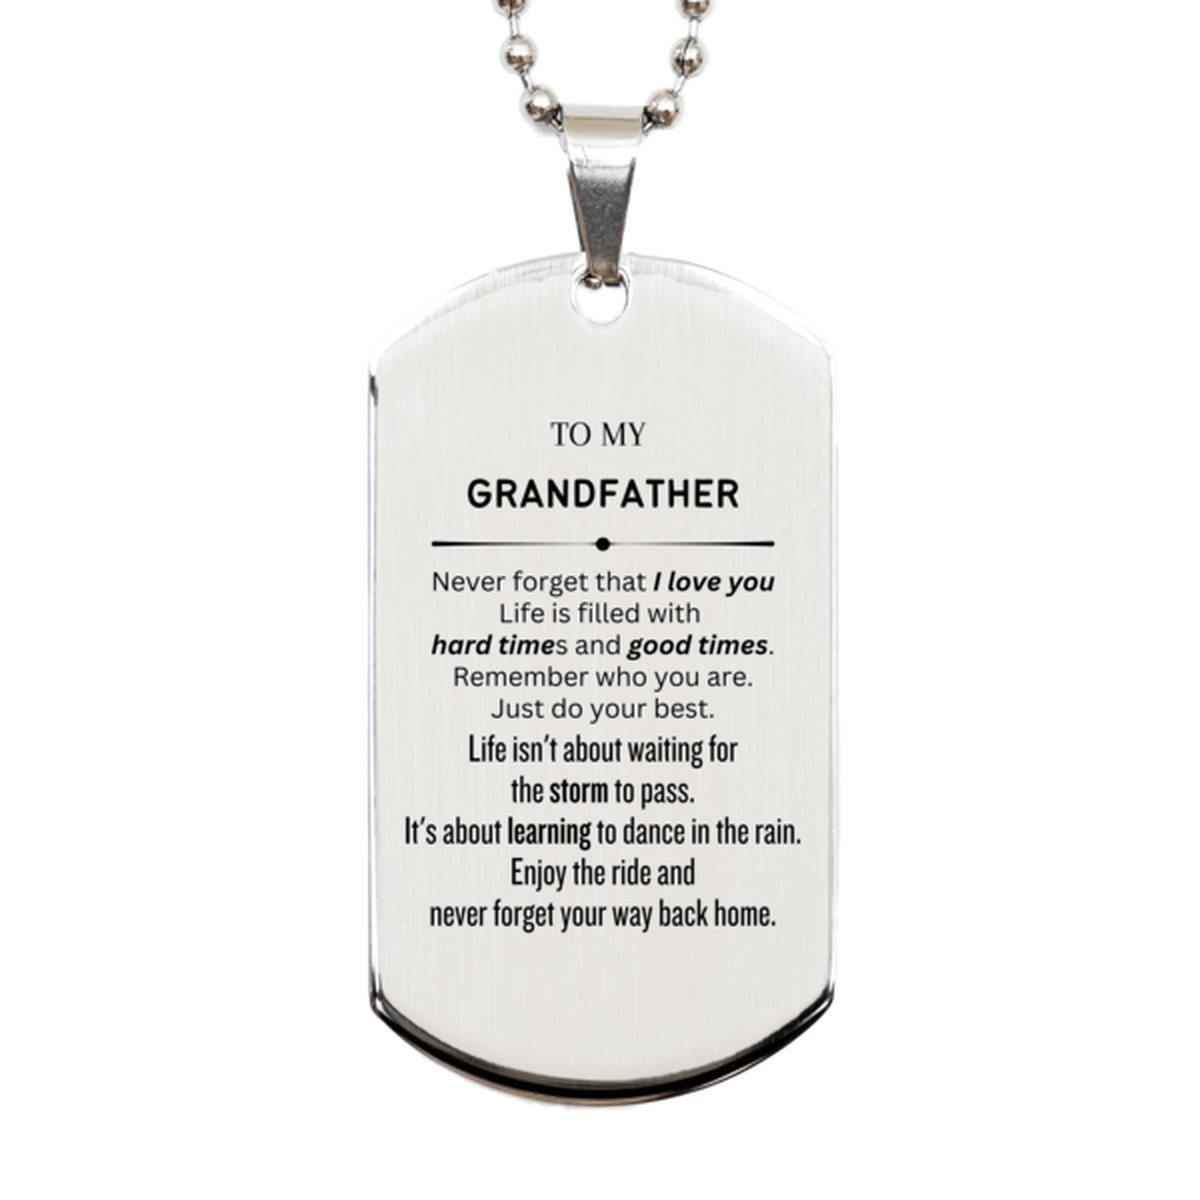 Christmas Grandfather Silver Dog Tag Gifts, To My Grandfather Birthday Thank You Gifts For Grandfather, Graduation Unique Gifts For Grandfather To My Grandfather Never forget that I love you life is filled with hard times and good times. Remember who you